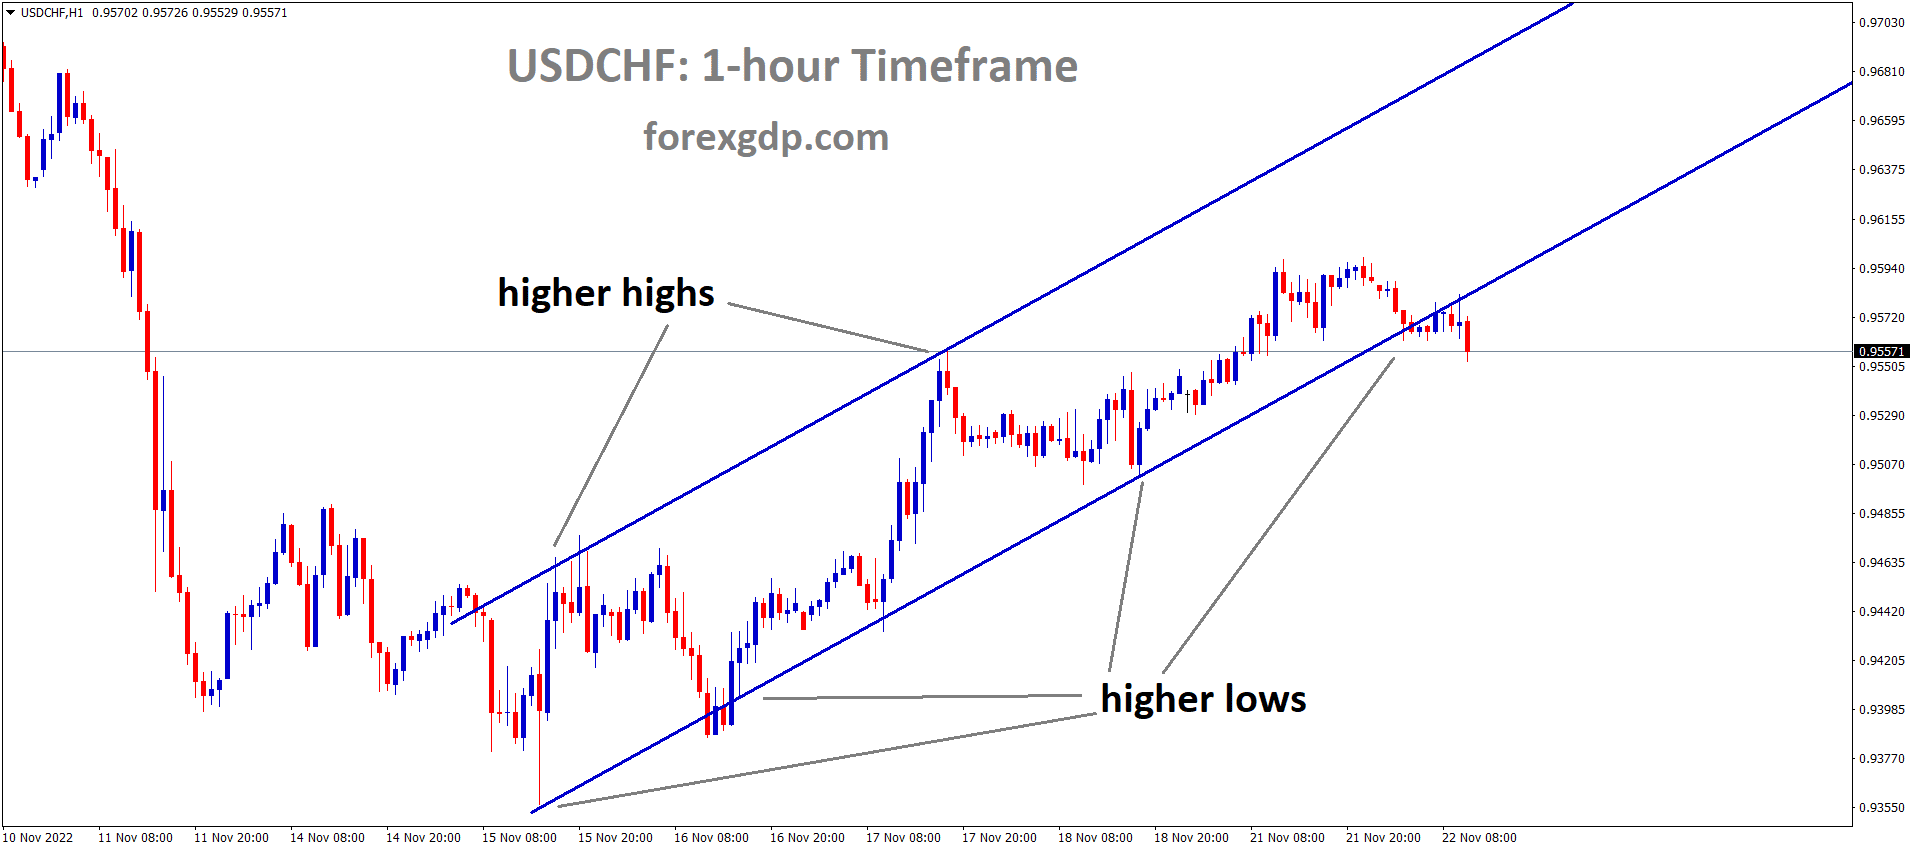 USDCHF is moving in an Ascending channel and the market has reached the higher low area of the channel.